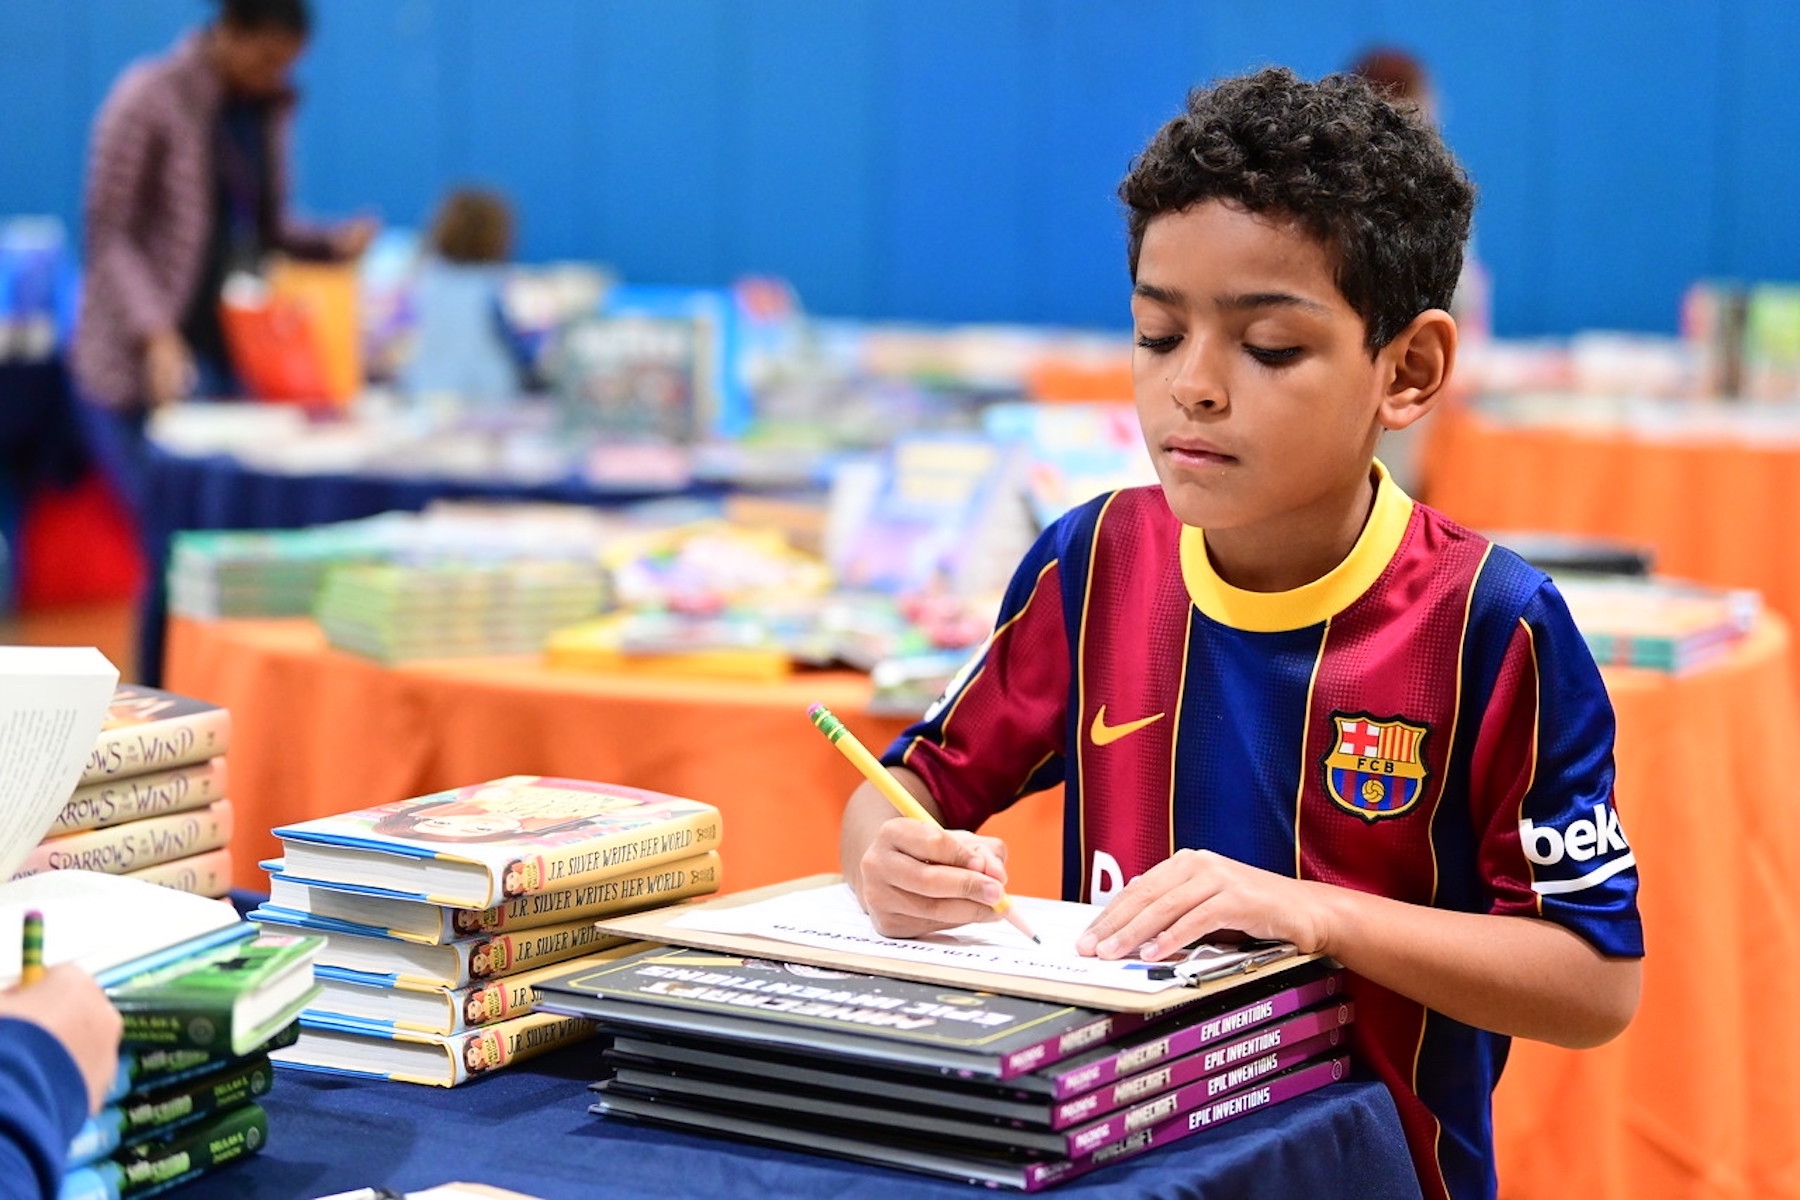 Fieldston Lower students writes down the name of a book using a pencil at the book fair.